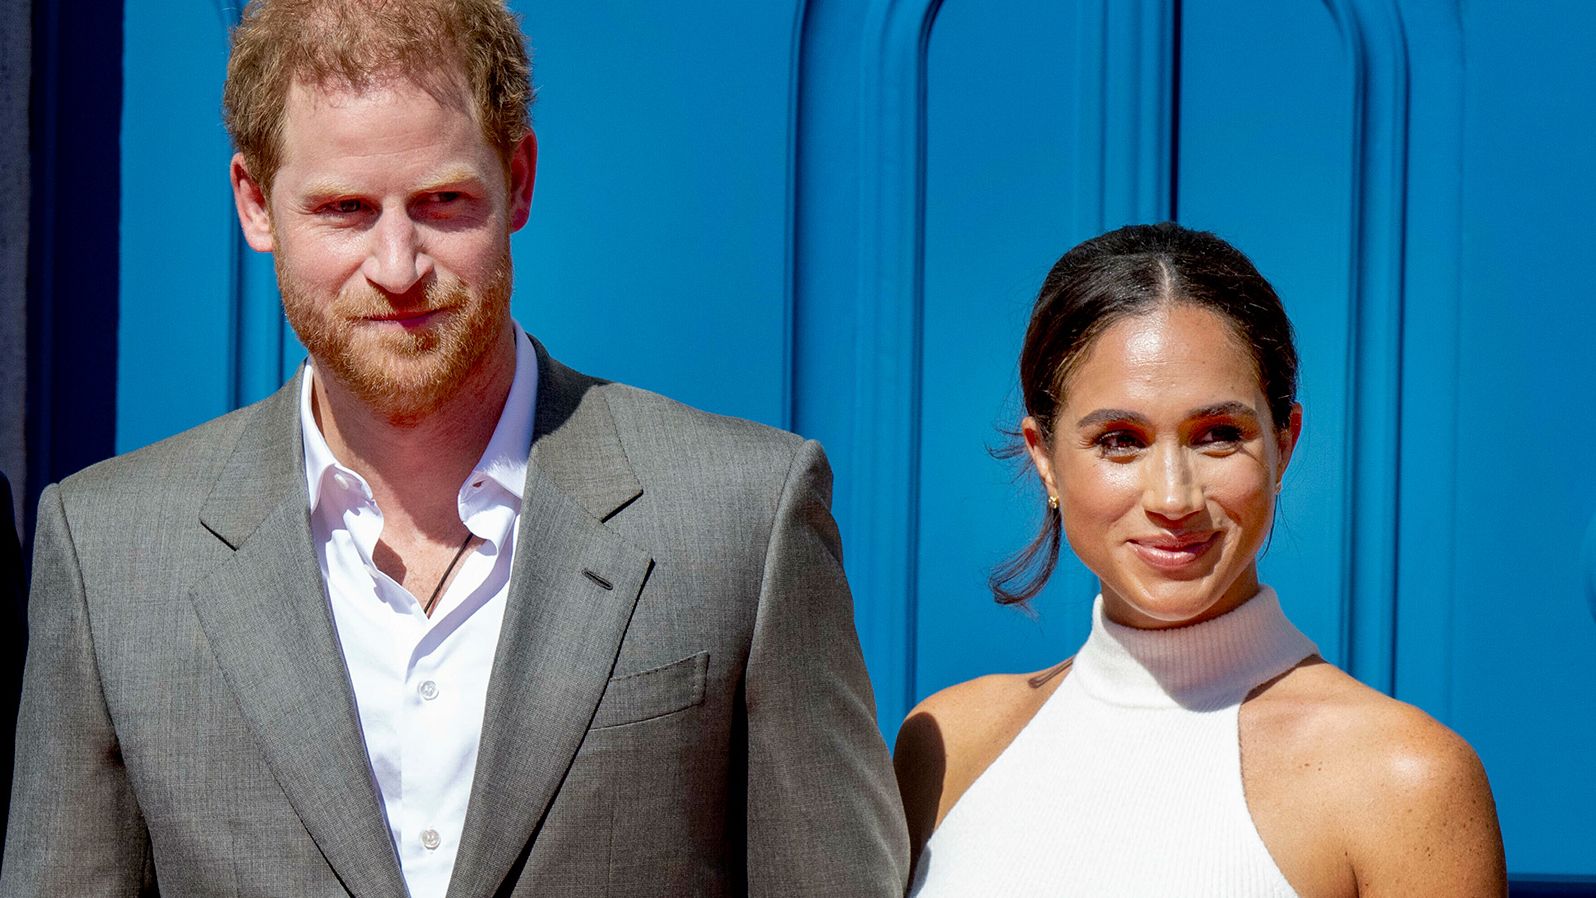 The Duke and Duchess of Sussex in Düsseldorf, Germany on September 6 to help kick-off the One Year to Go event of the Invictus Games